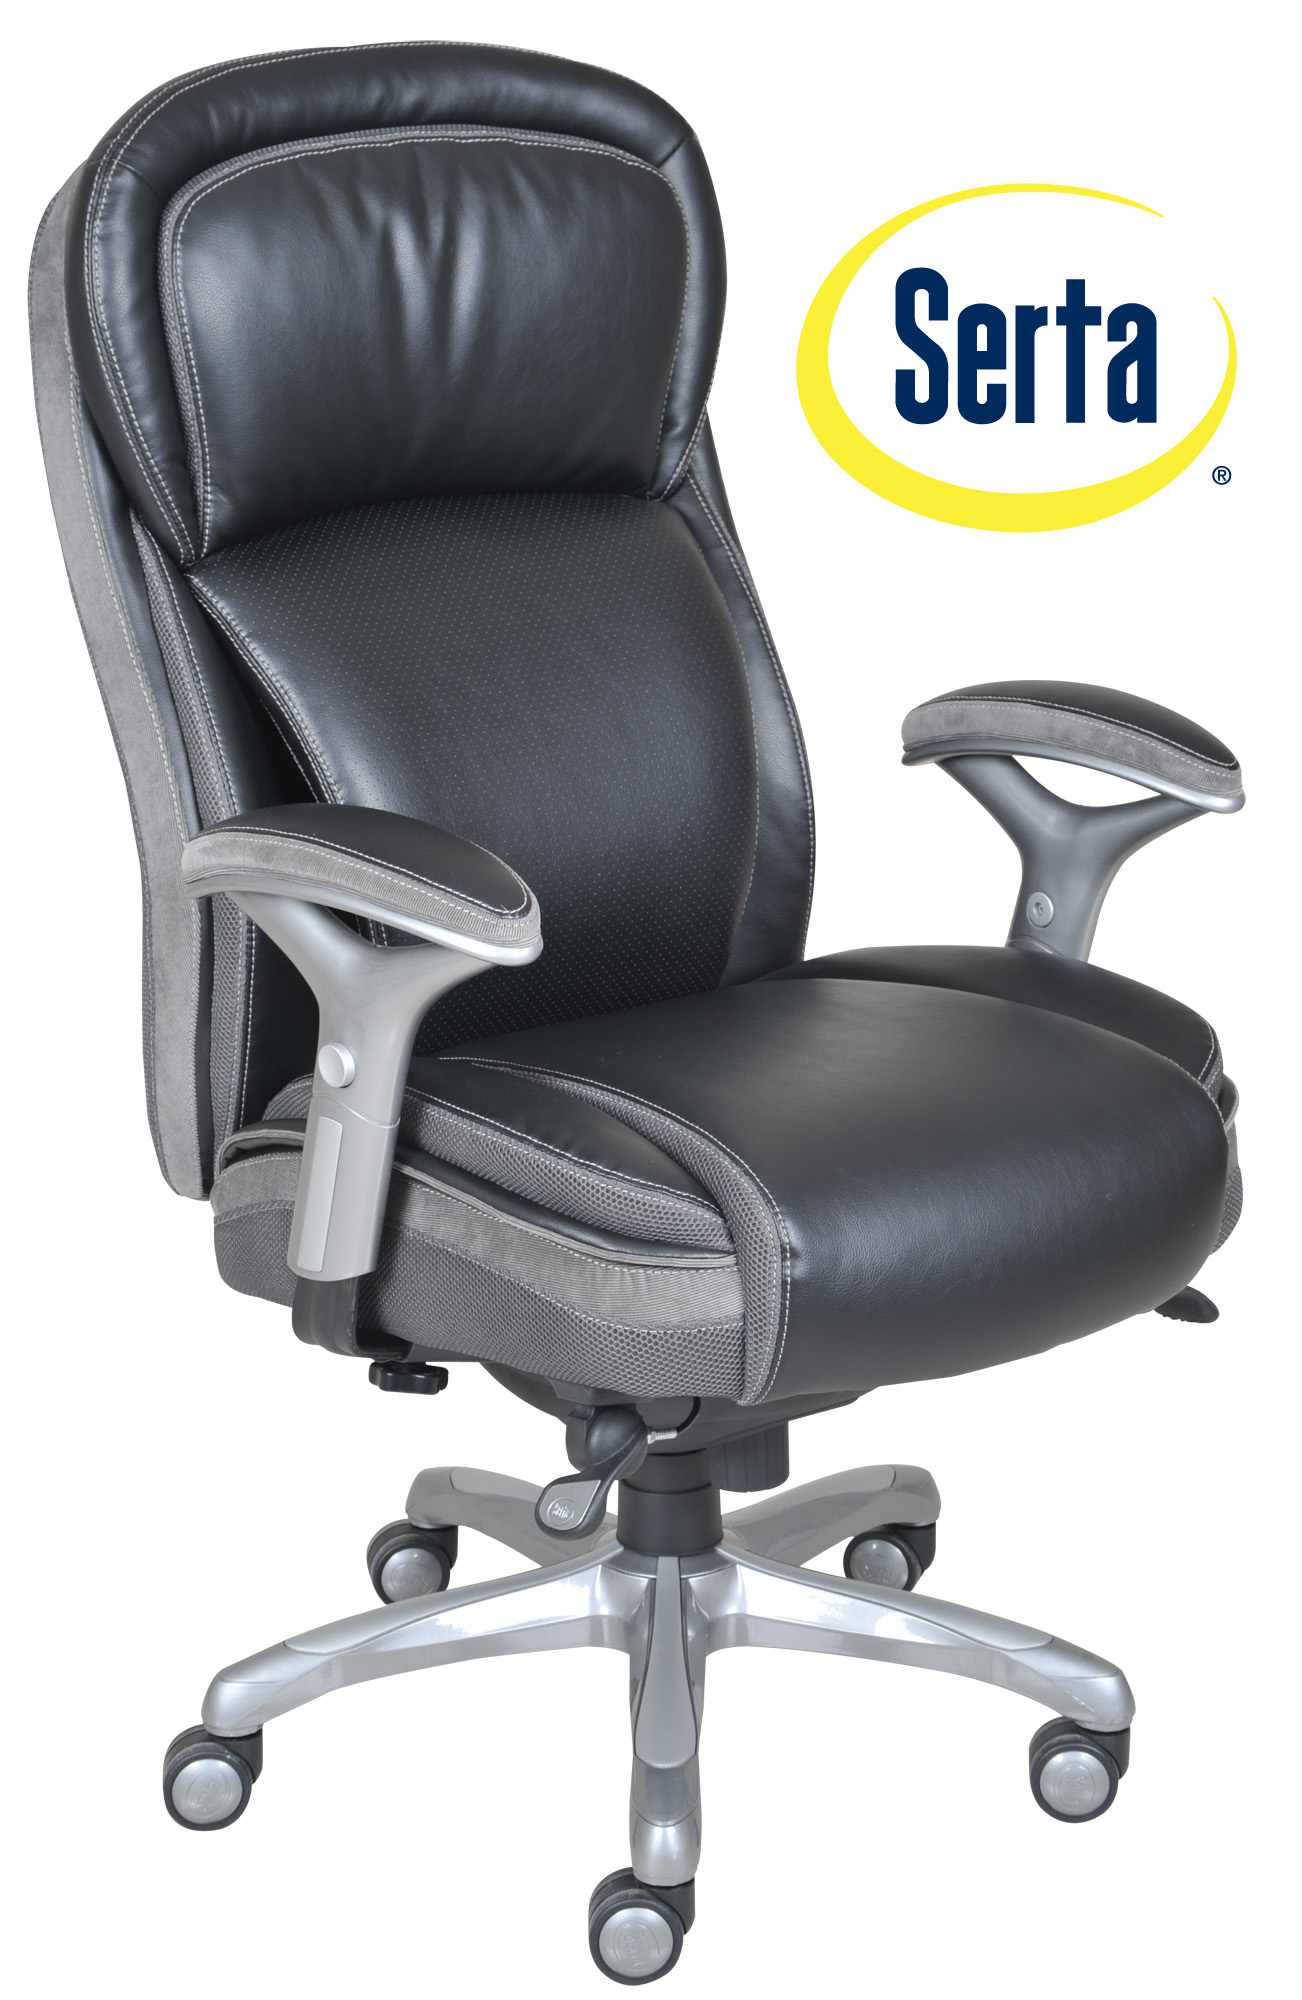 Serta Smart Layers Premium Elite Manager Chair with Air in